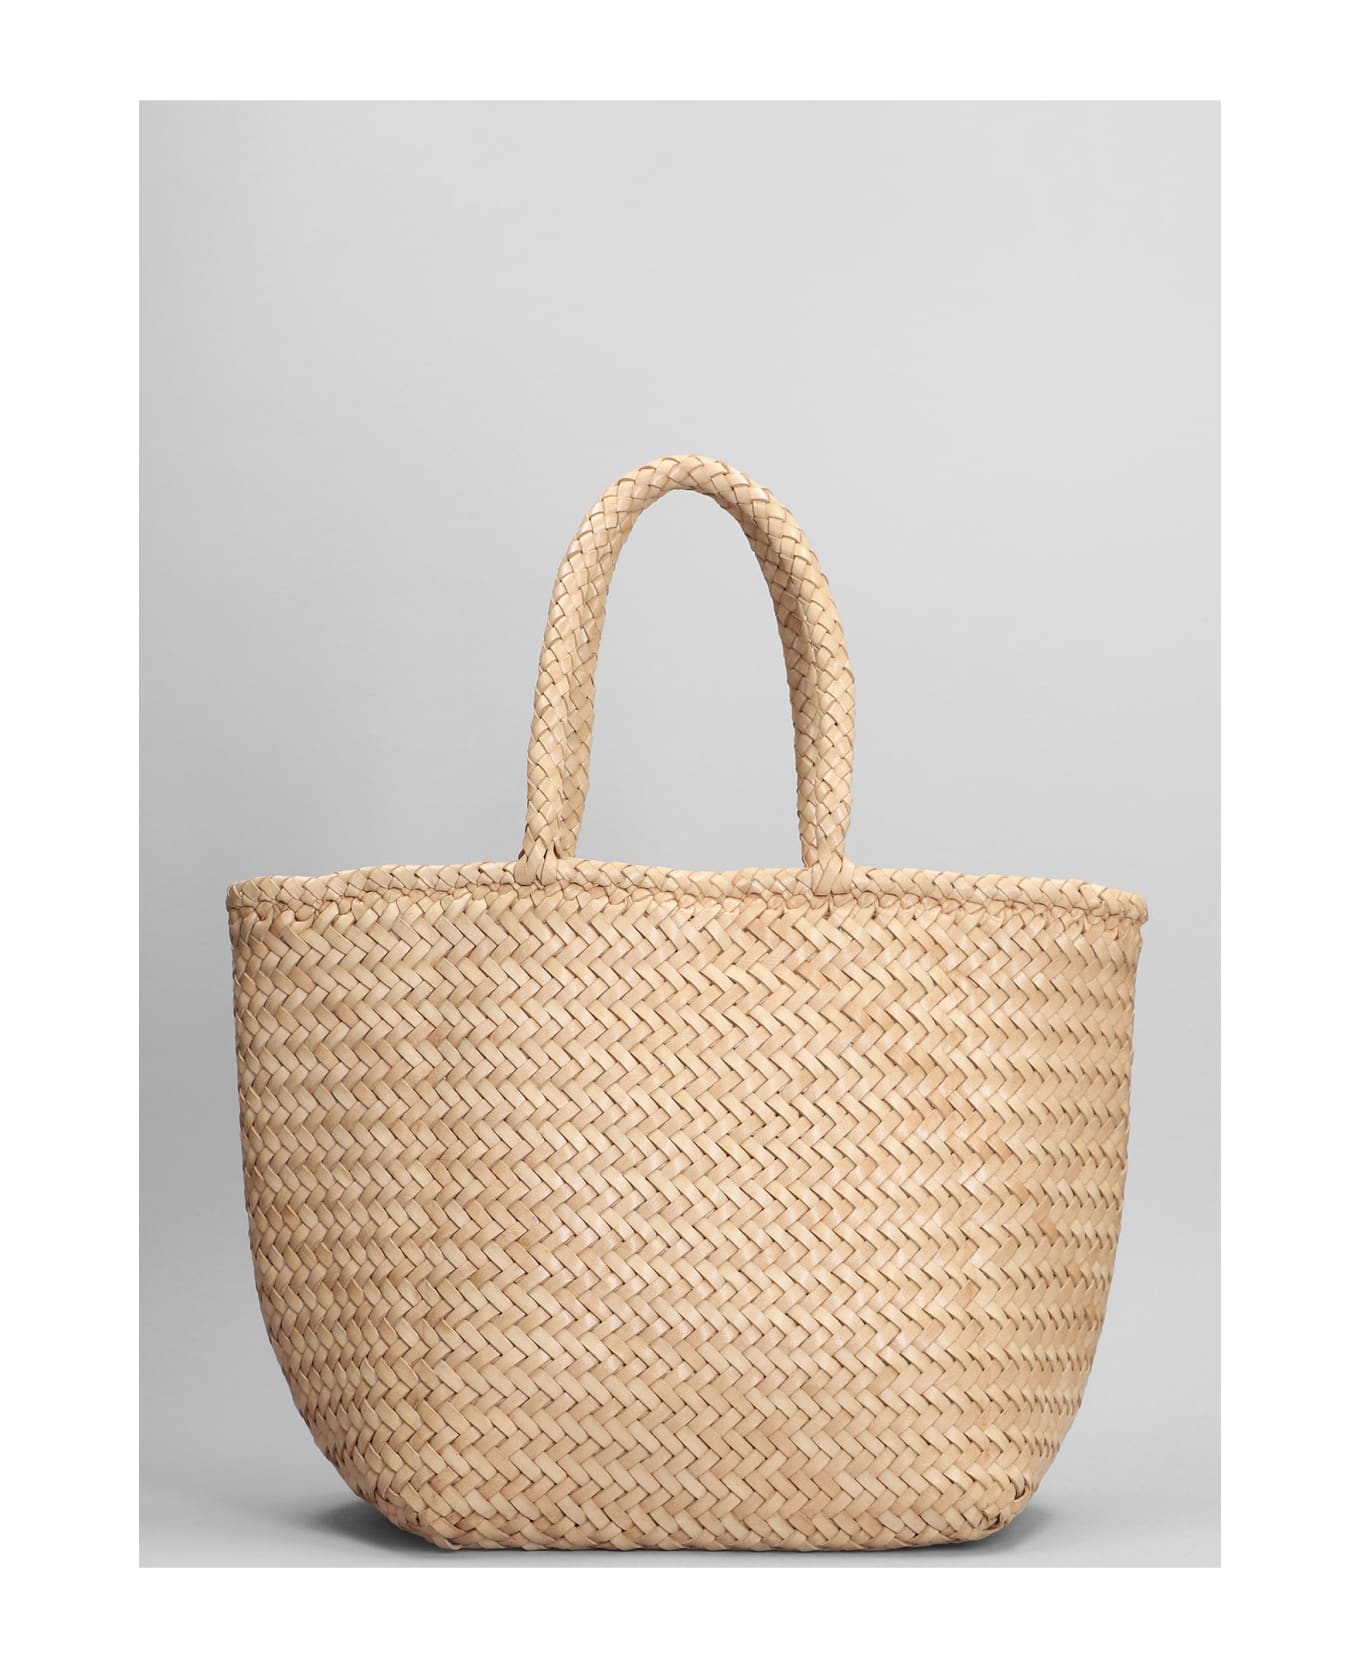 Dragon Diffusion Grace Basket Tote In Beige Leather - beige